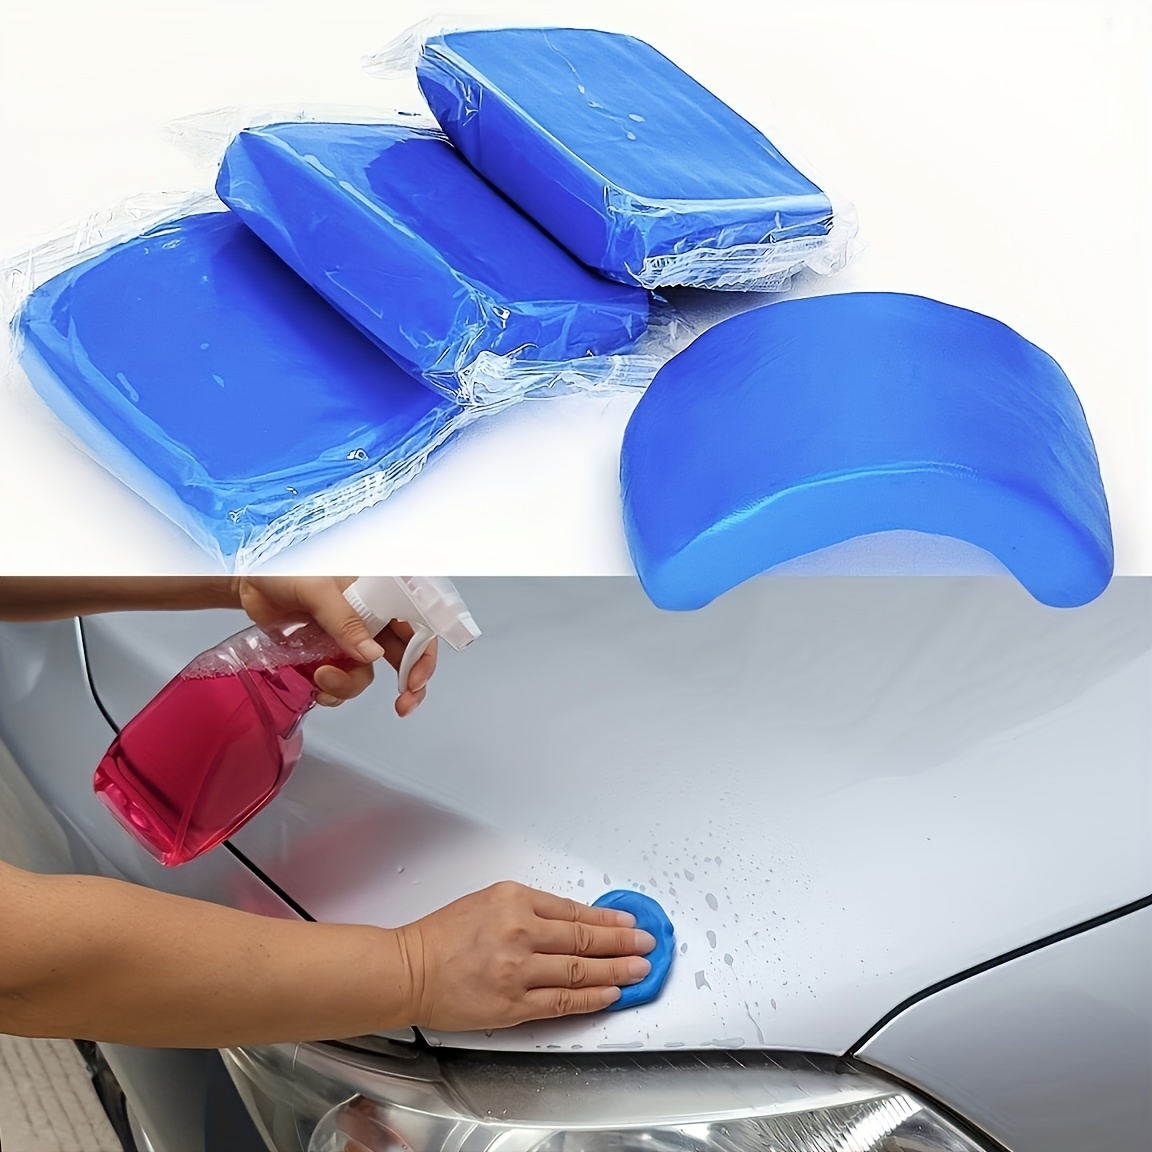  Car Clay Bar for Car Detailing 6 Pack 600g, Auto Detailing Clay  Bar Cleaner, Grade Cleaner Kit for Coating Polisher Car Wash Kit Cleaning  RV Cars Boats Bus : Automotive